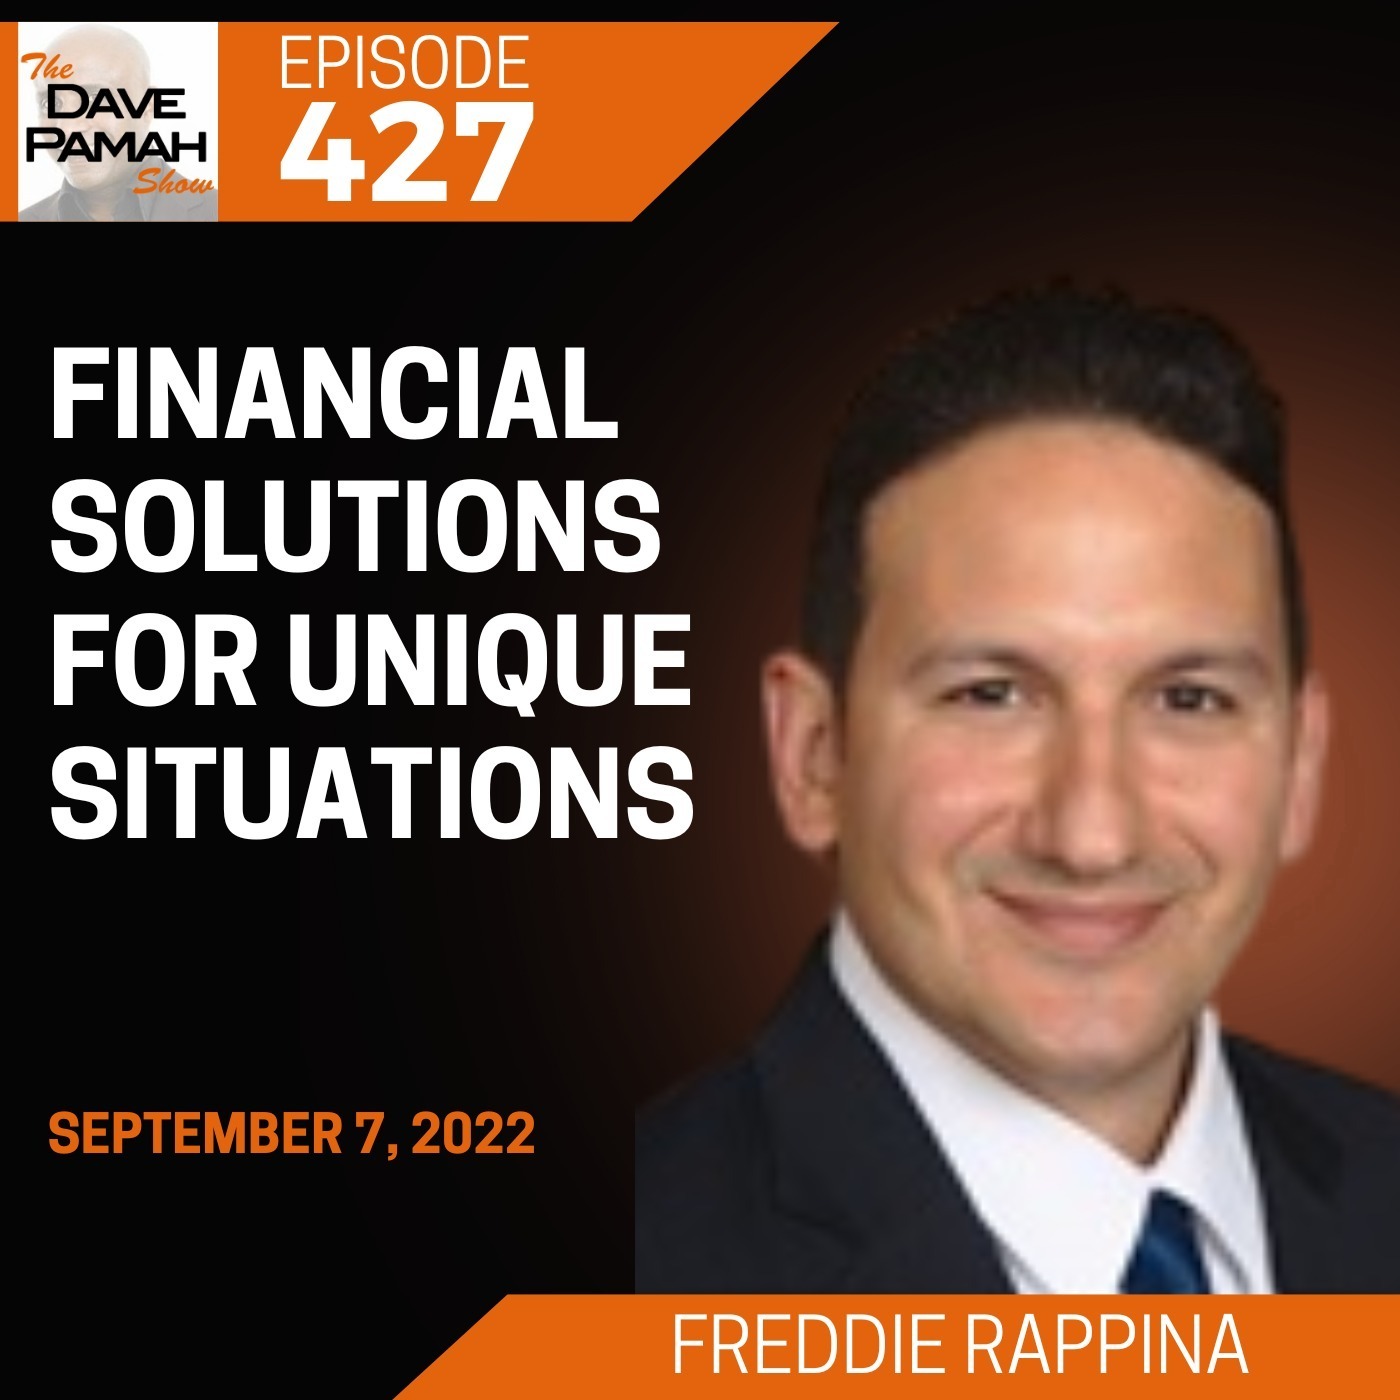 Financial solutions for unique situations with Freddie Rappina